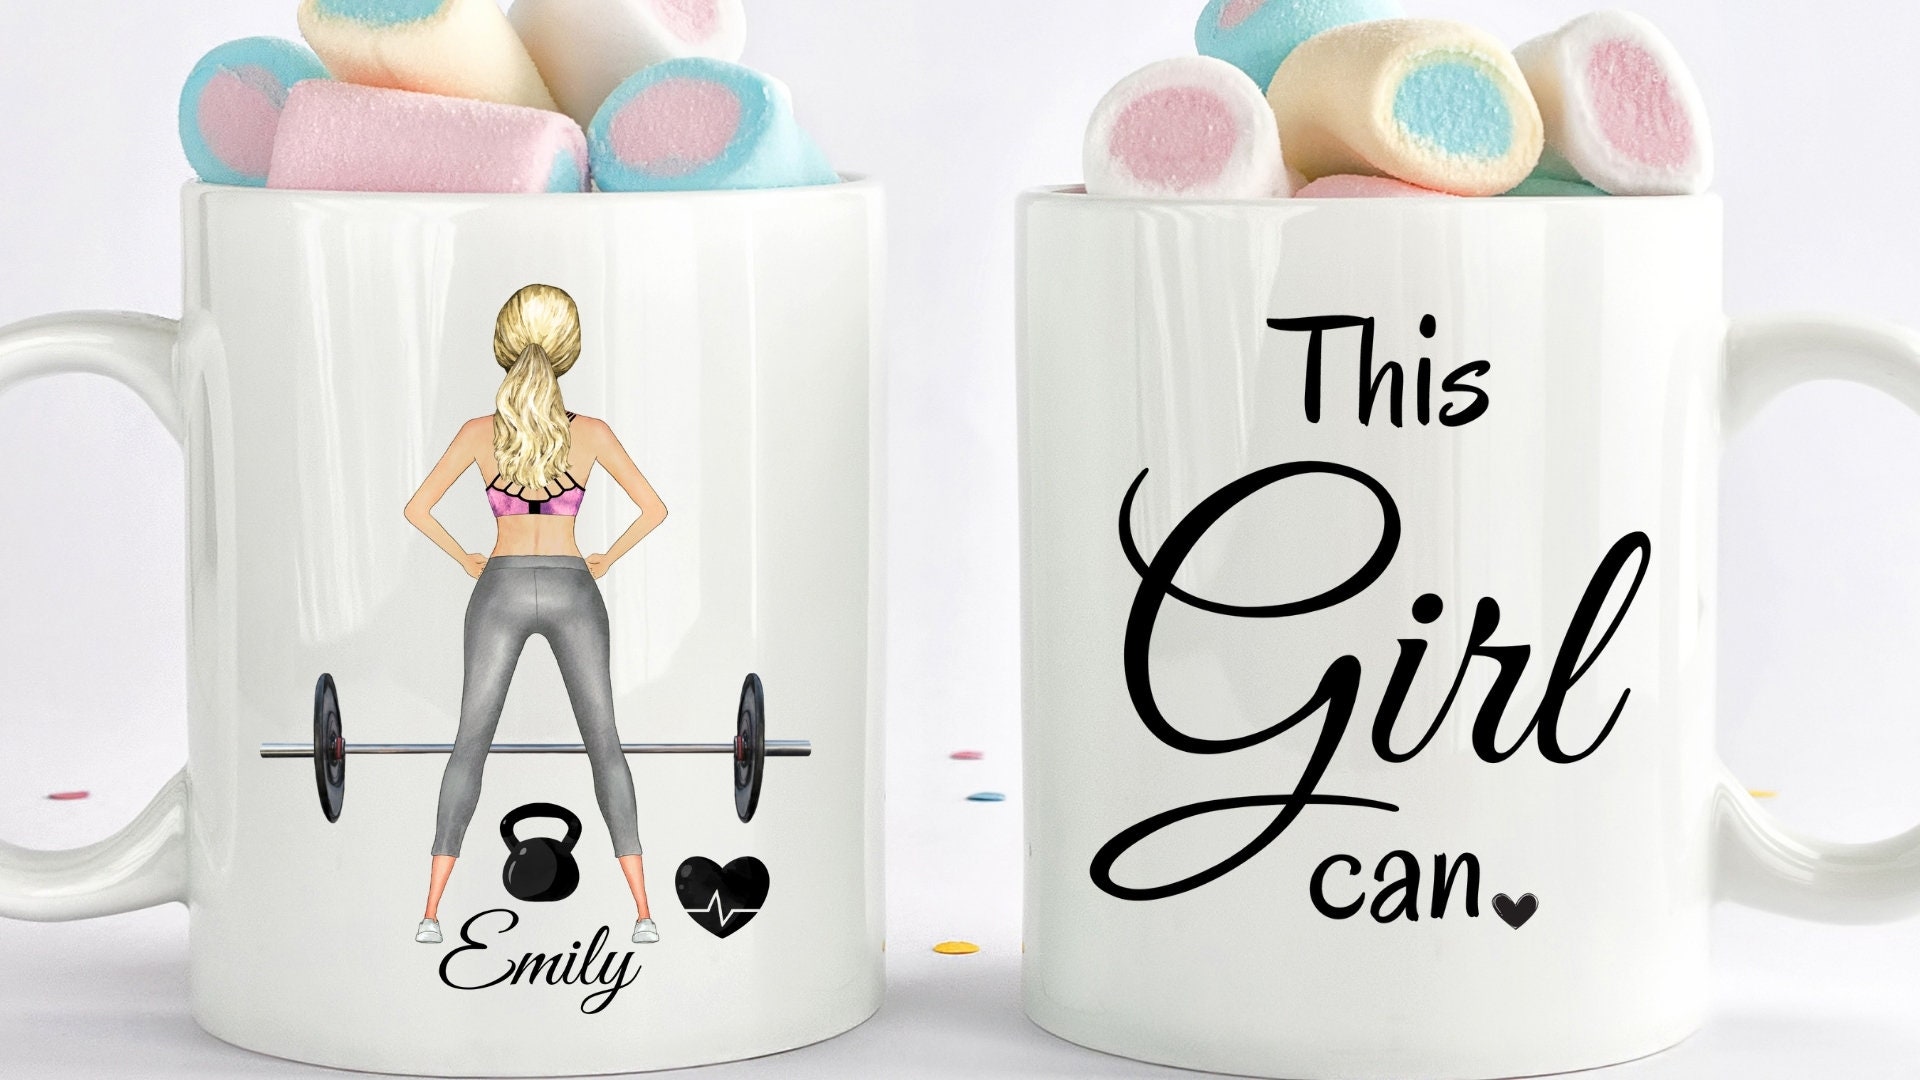  GR8AM Color-Changing Tea Mug 12oz - I'm into Fitness, Fit'ness  Taco in My Mouth - Cute Coffee Mugs for Women or Cool Cups for Men. Best  Ceramic Coffee Cups & Coffee